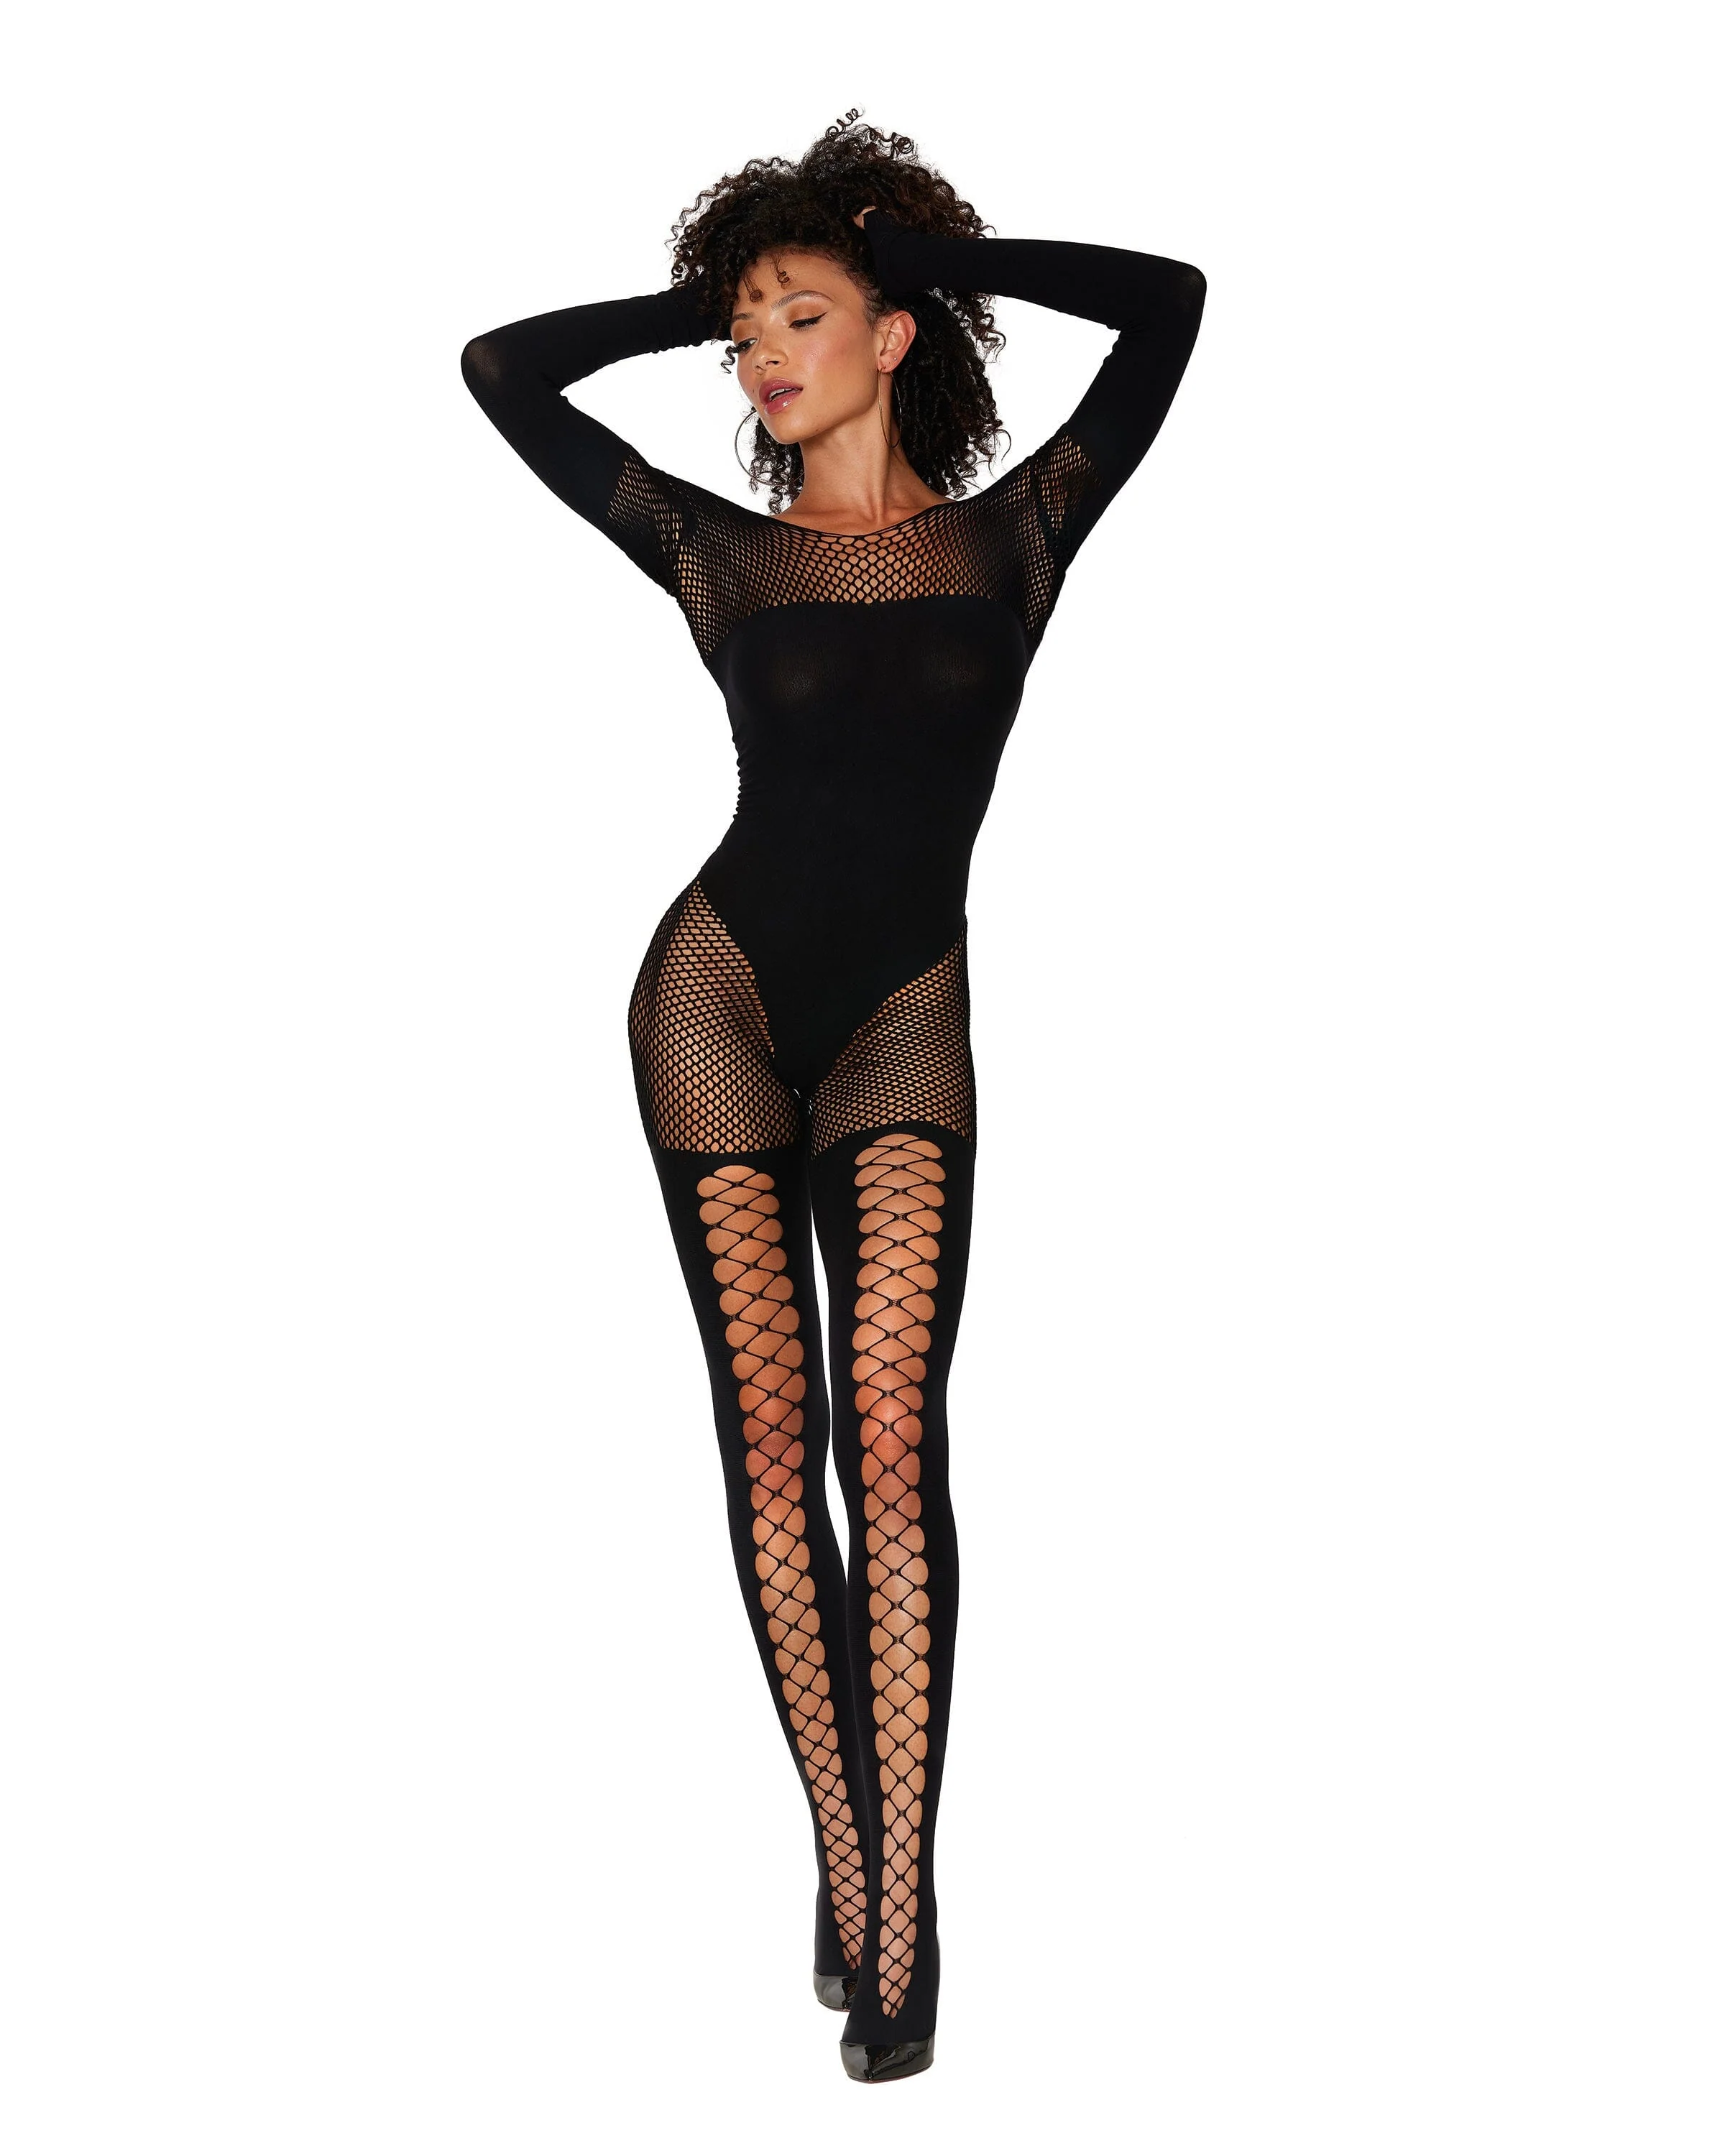 Lingerie Body Stocking Mesh Fishnet Queen Size Sexy Teddy Stretchy Bodysuit  Plus